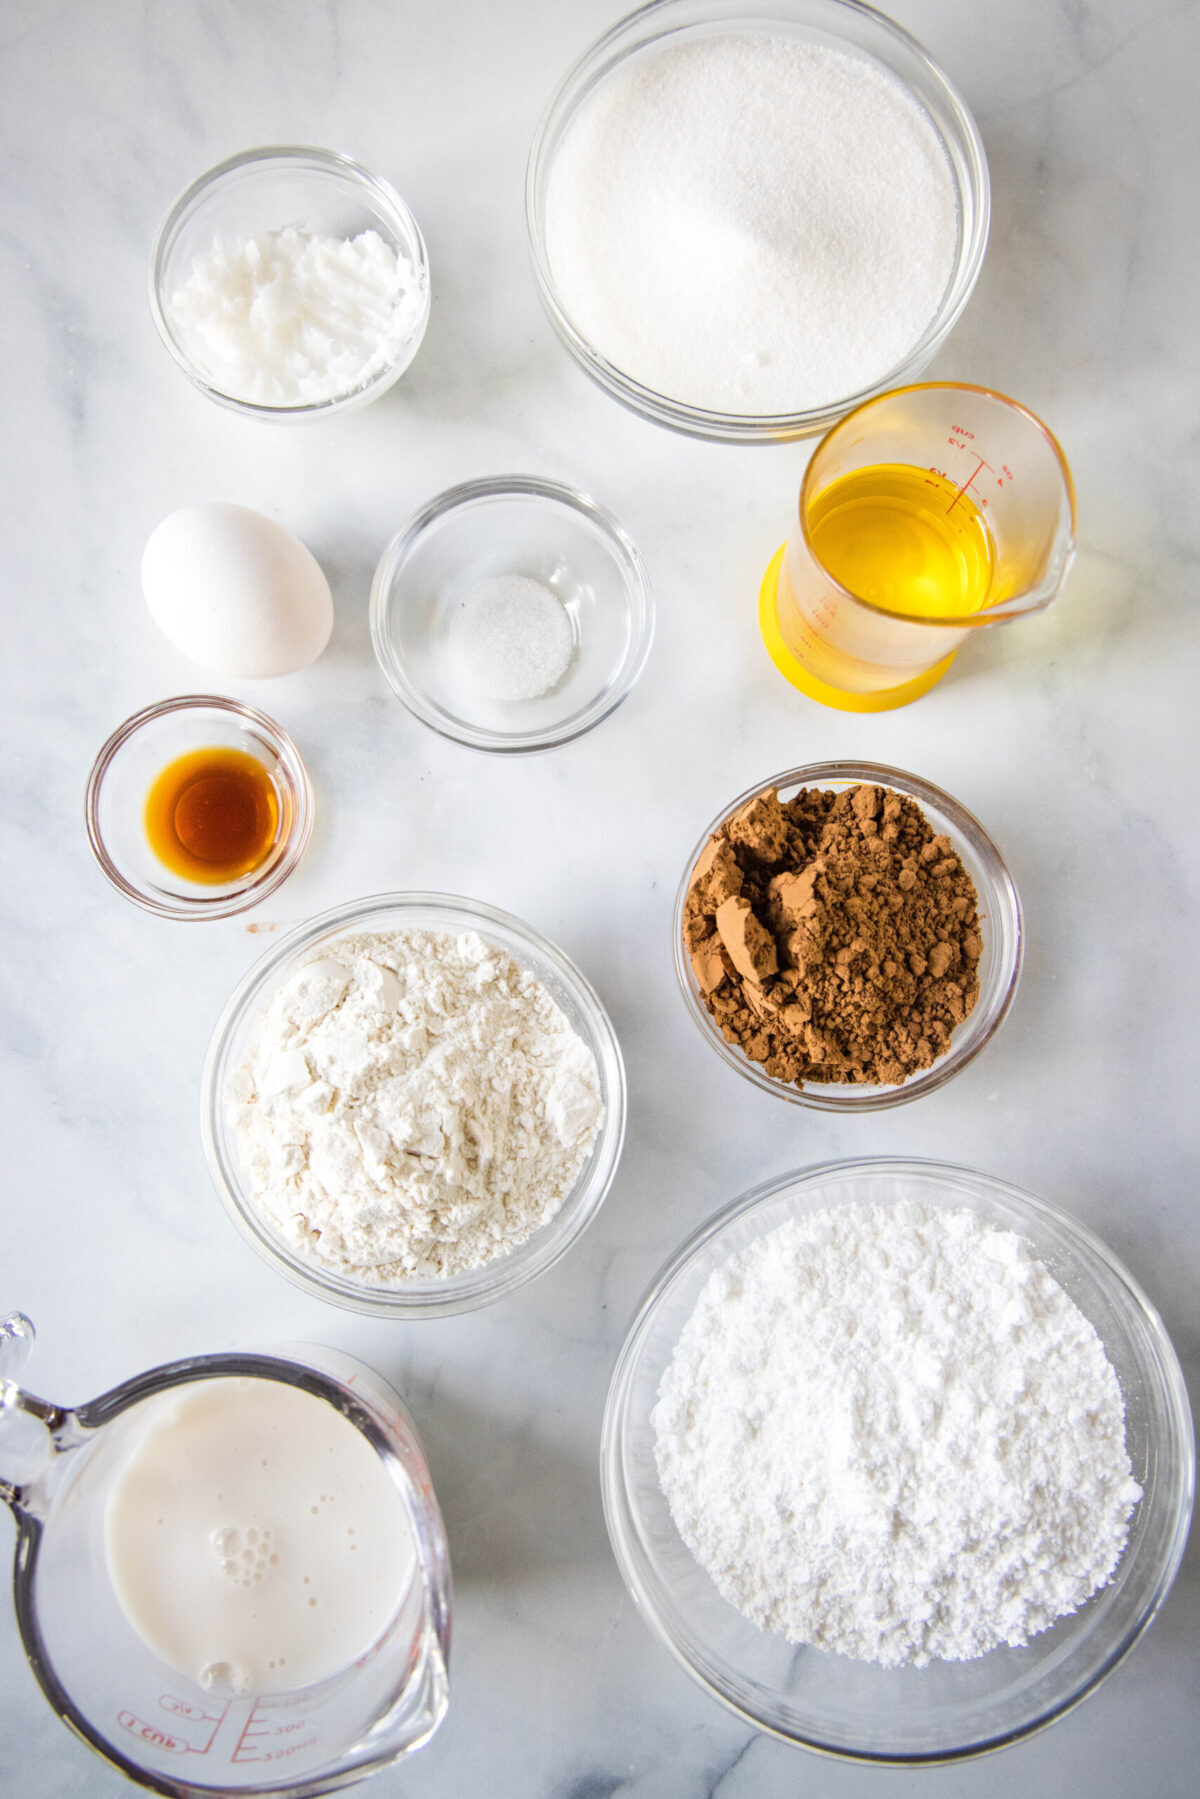 Overhead view of the ingredients needed for dairy free brownies: a pyrex of almond milk, a bowl of flour, a bowl of sugar, a bowl of cocoa powder, a glass of oil, a bowl of vanilla, a bowl of salt, an egg, and a bowl of coconut oil.